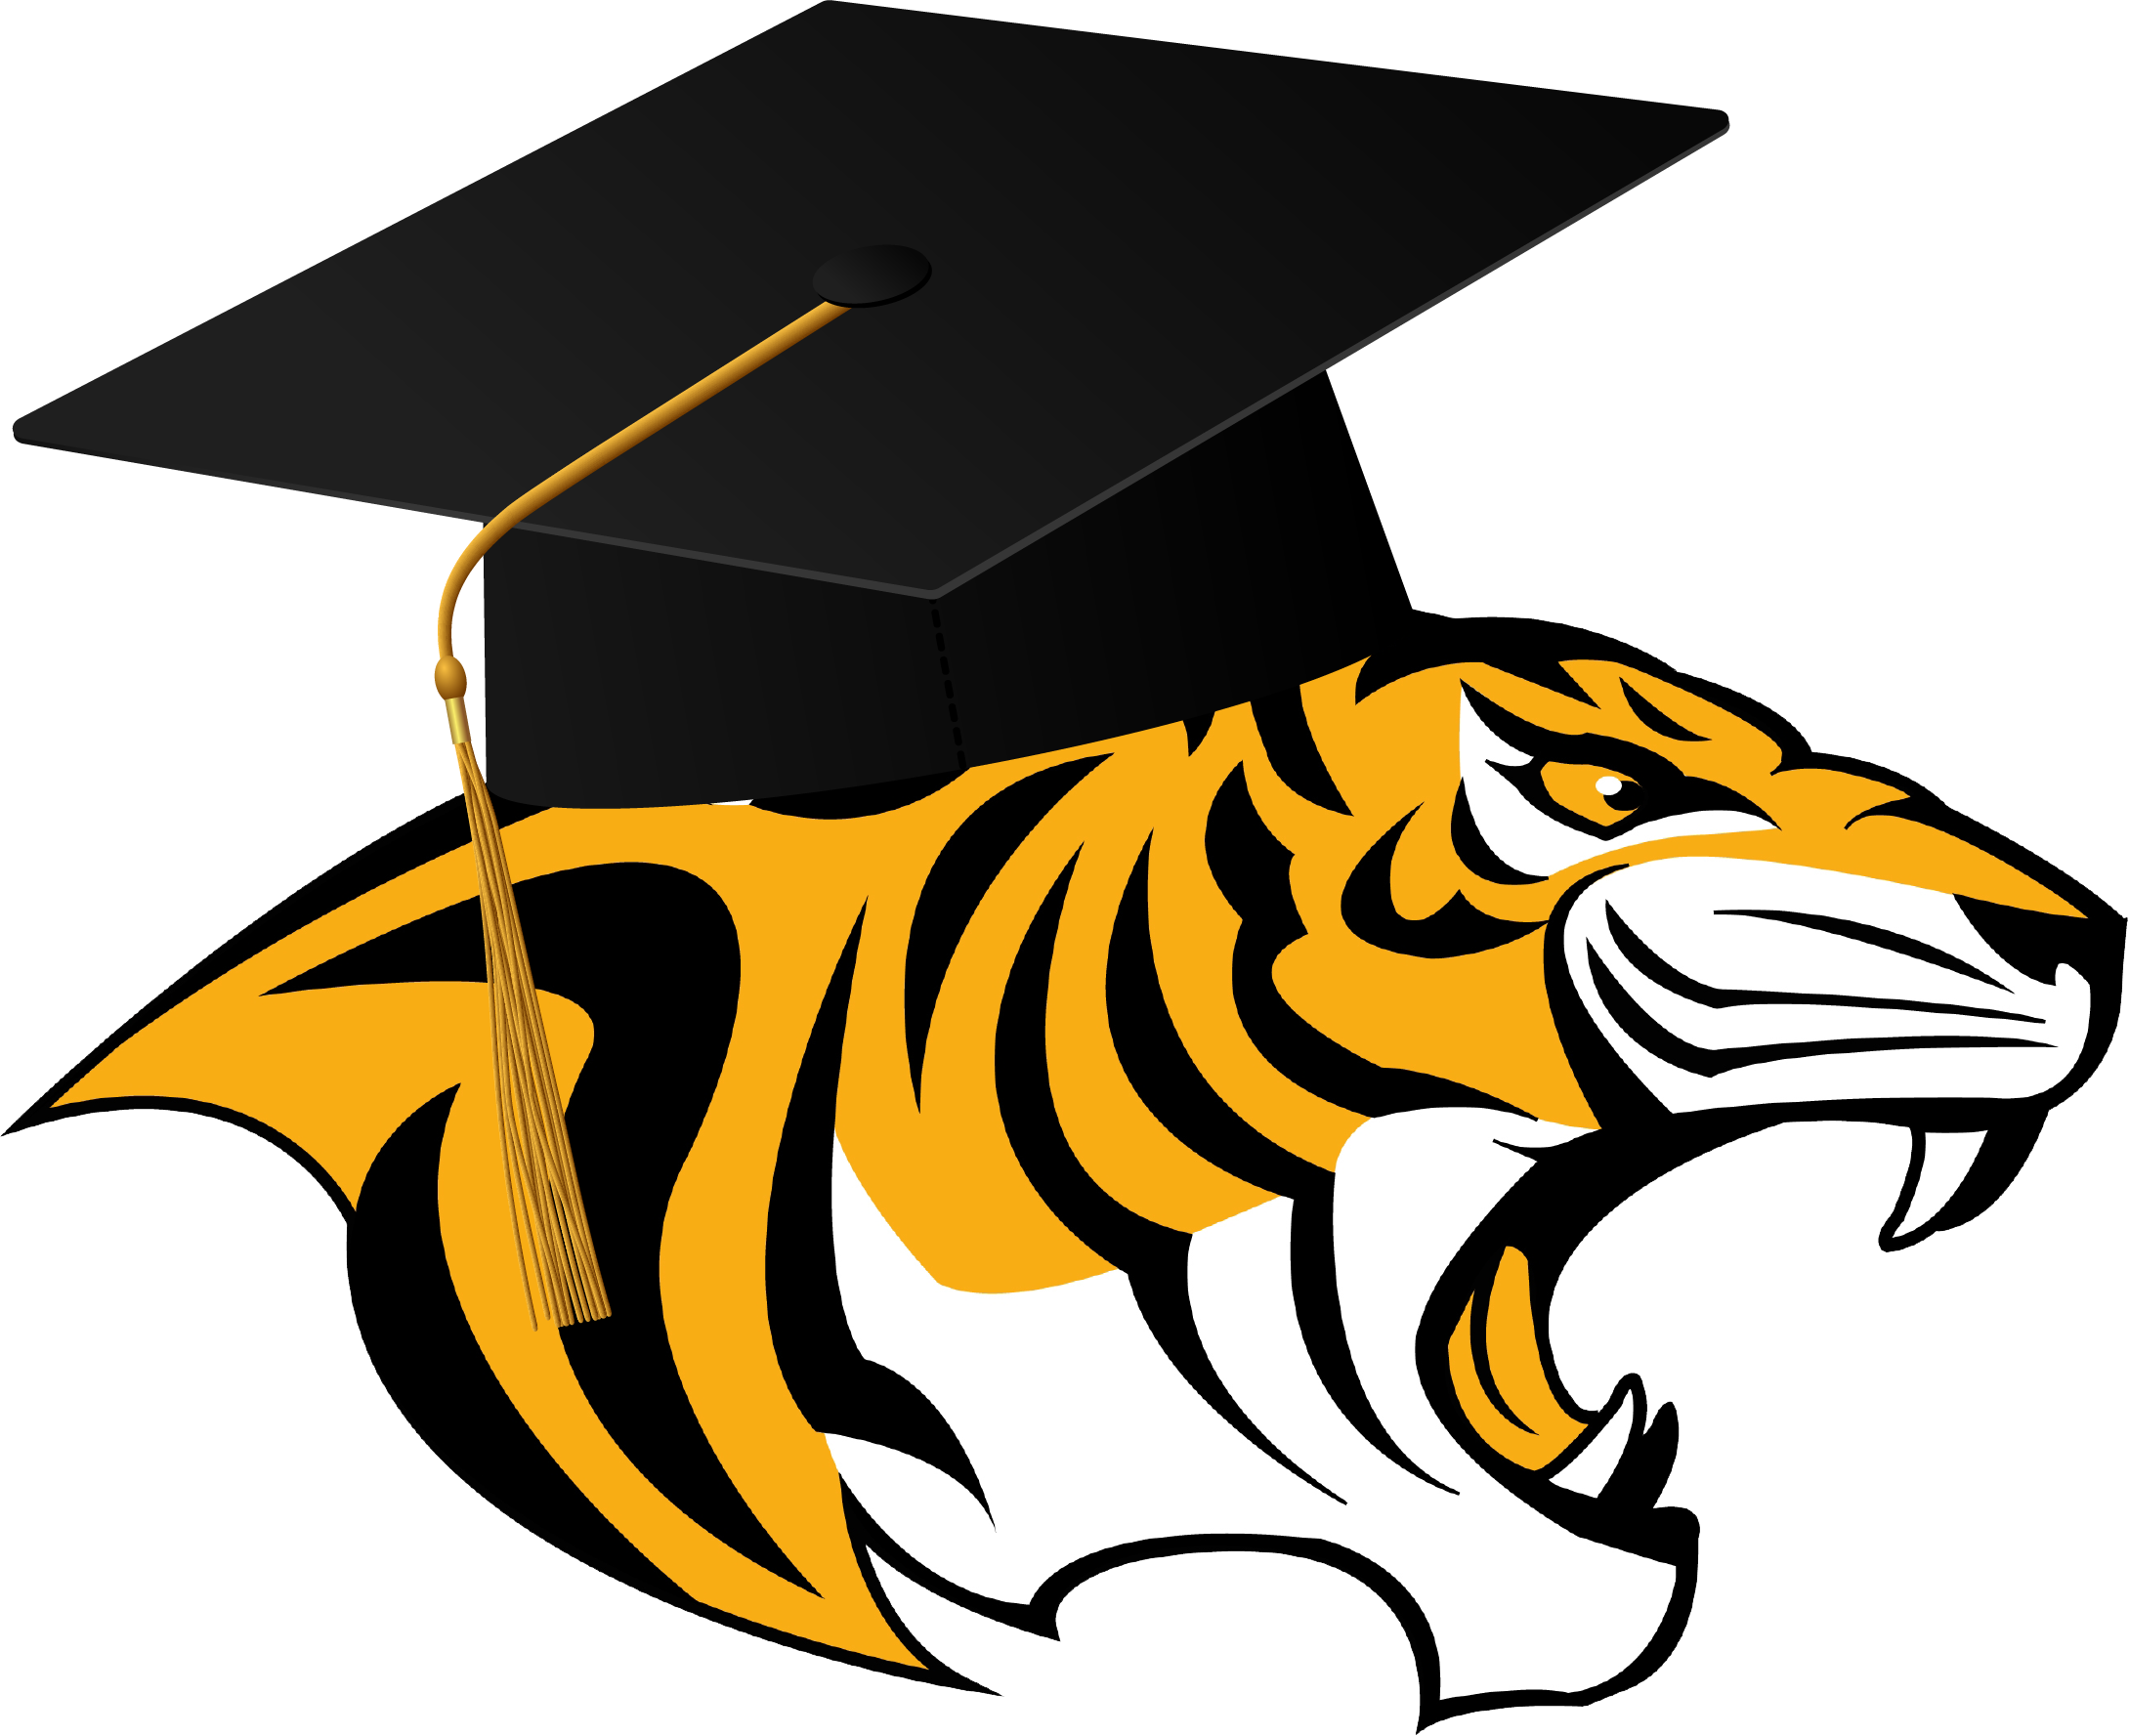 Tiger with cap